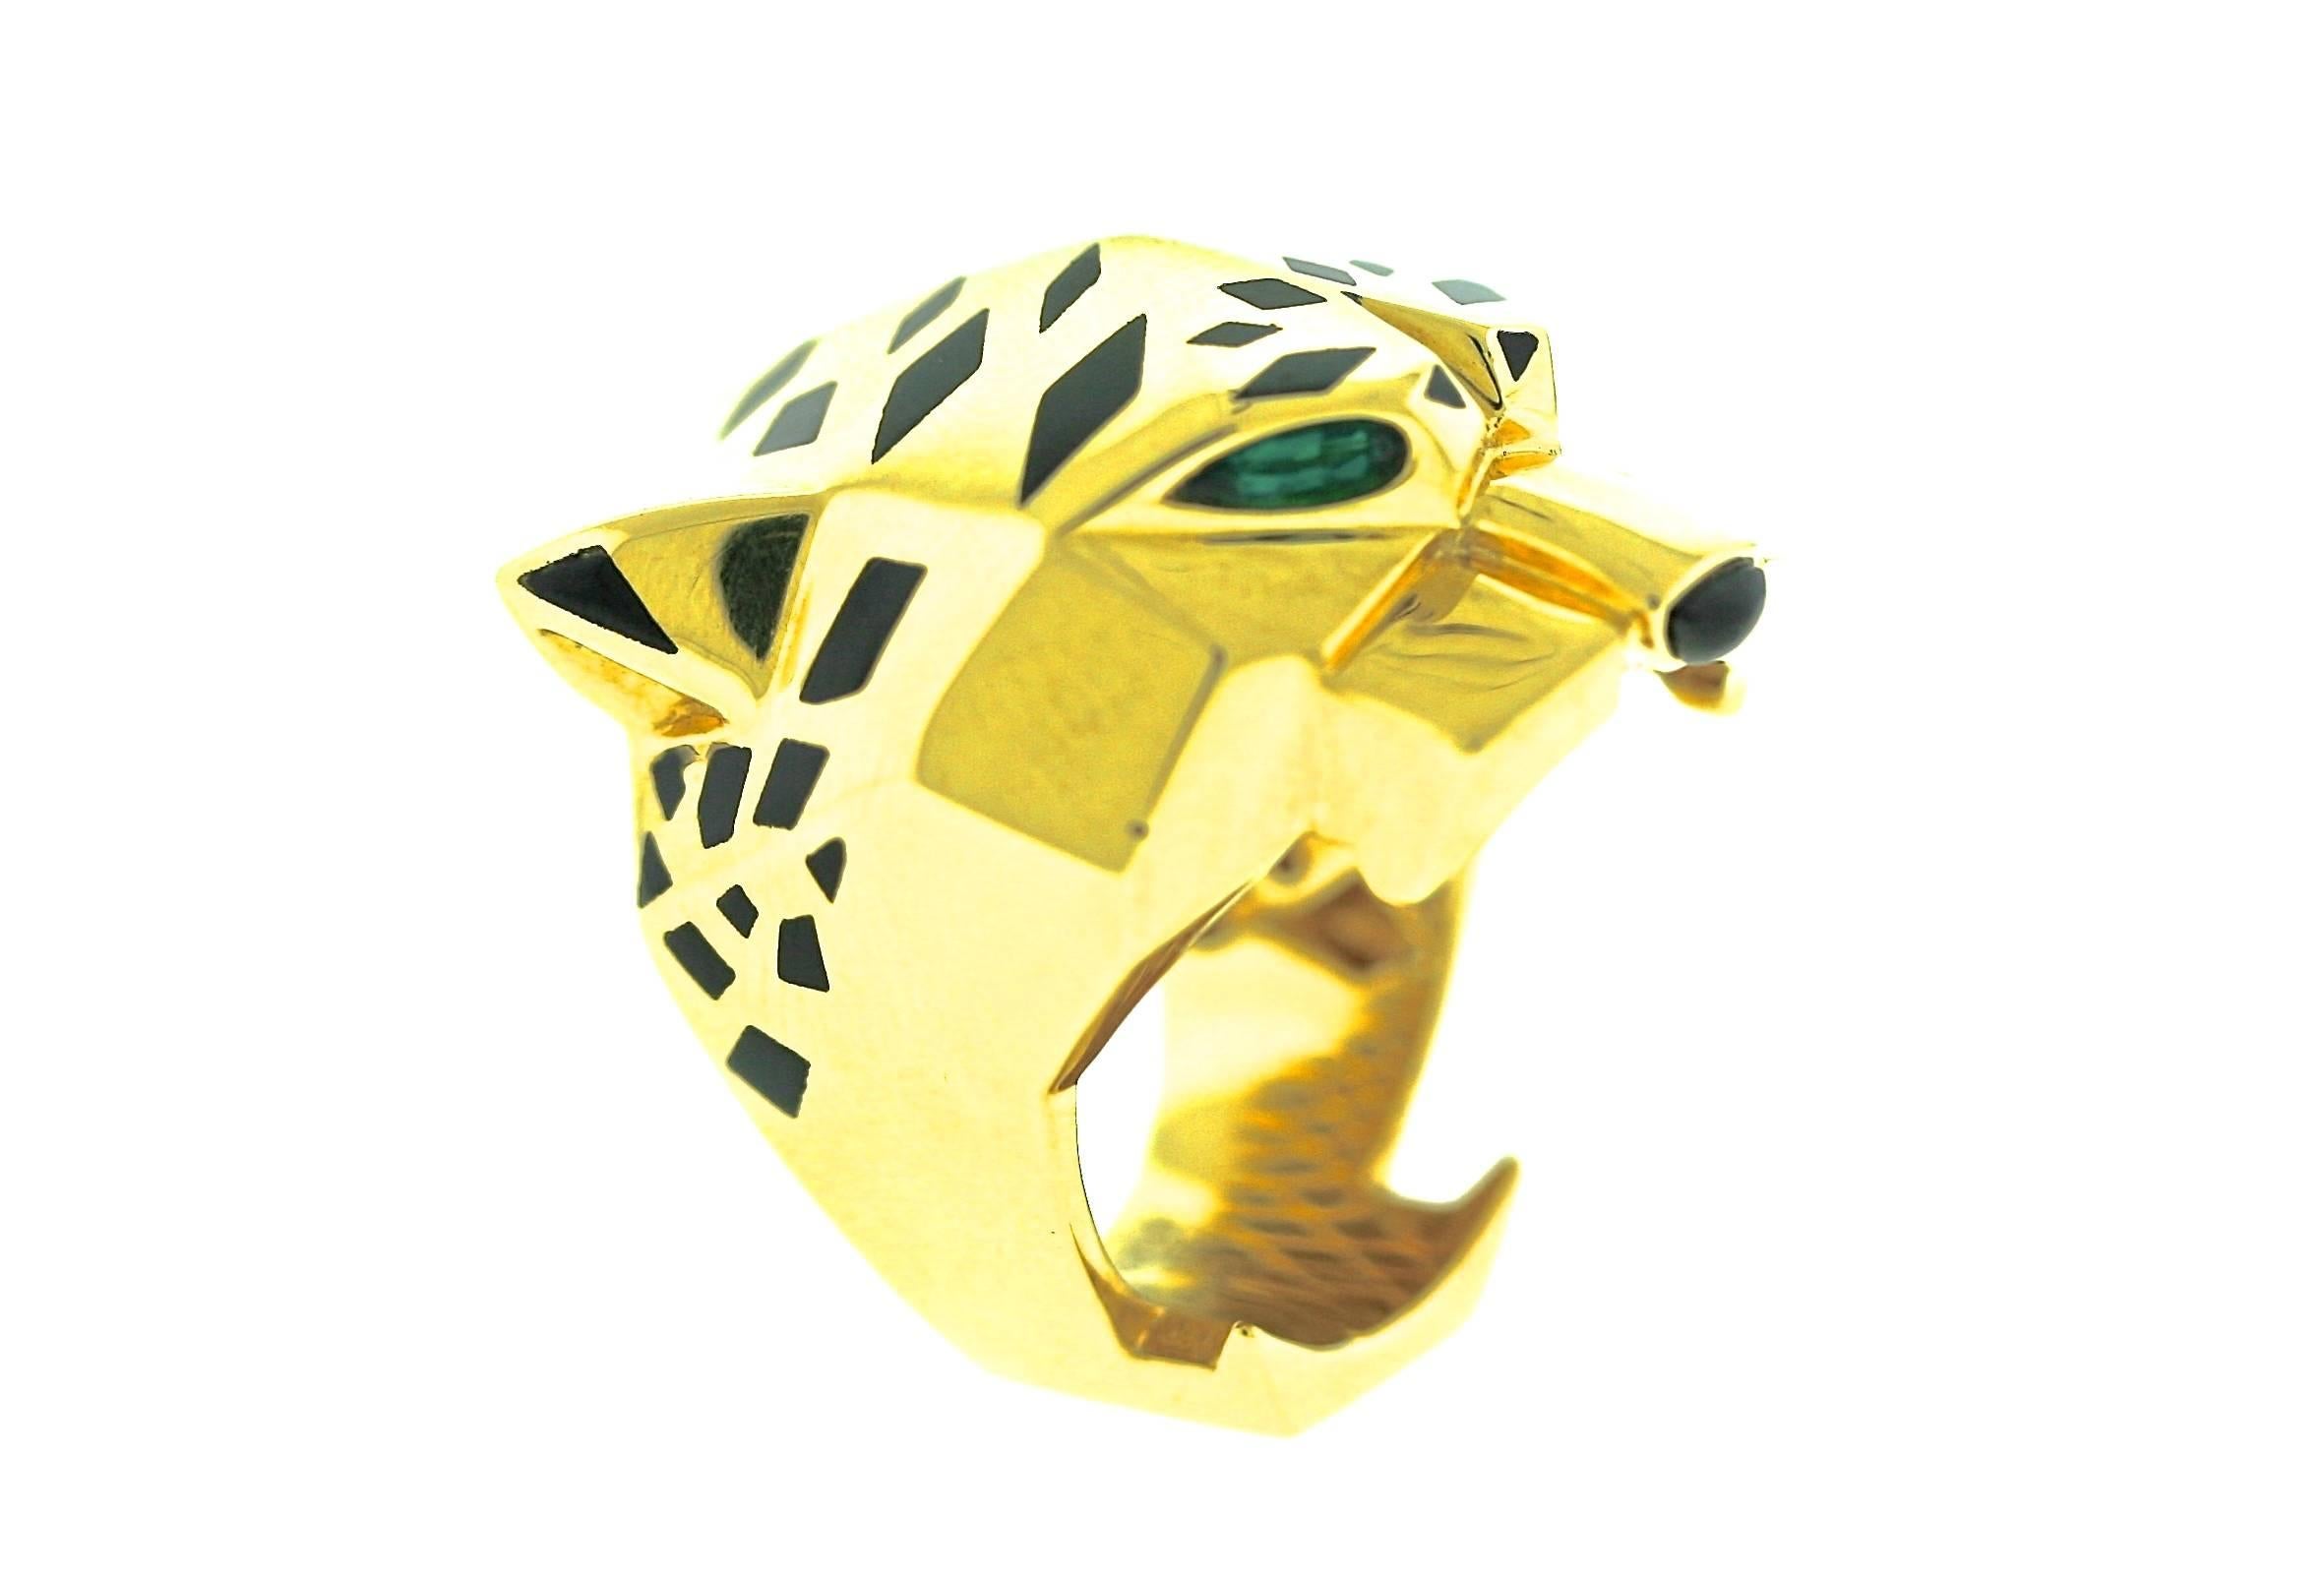 Iconic Cartier Panthere collection ring in 18k gold, enamel and black onyx with faceted peridot eyes. Size 7.5.  1